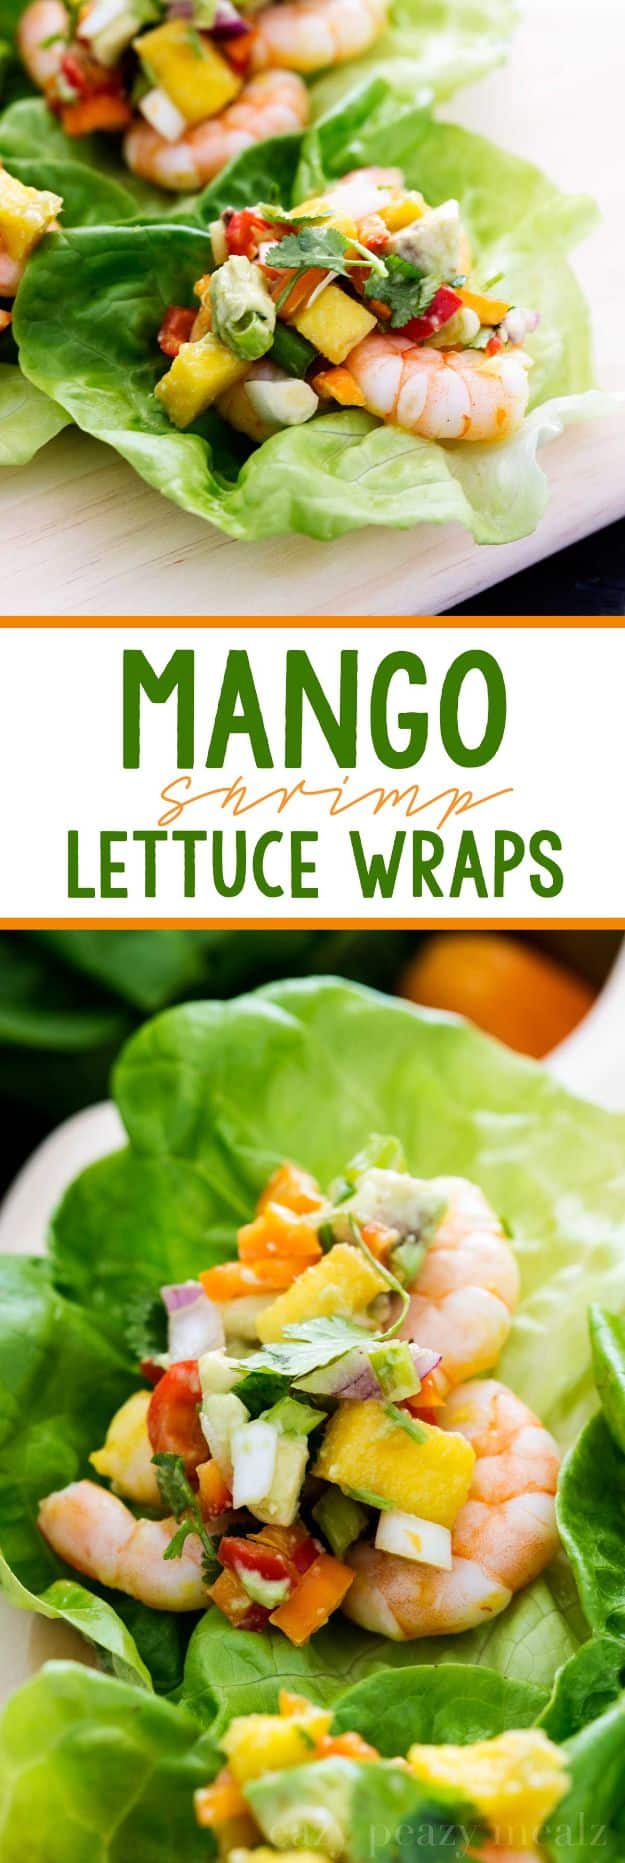 Shrimp Recipes - Mango Shrimp Lettuce Wraps - Healthy, Easy Recipe Ideas for Dinner Using Shrimp - Grilled, Creamy Baked Pasta, Fried, Spicy Asian Style, Mexican, Sauteed Garlic